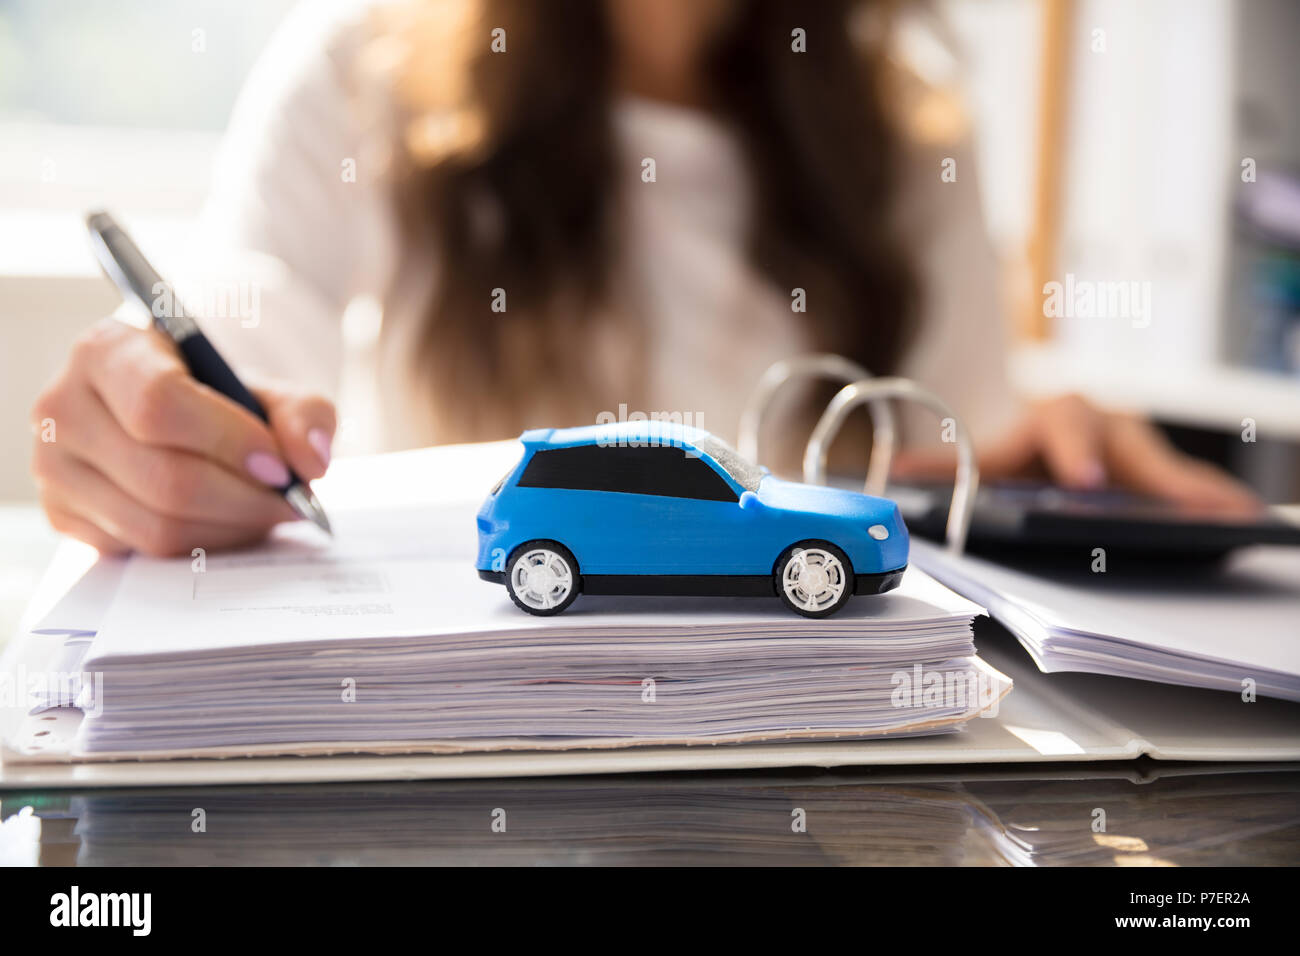 Businesswoman Working On Documents With Small Blue Car Stock Photo